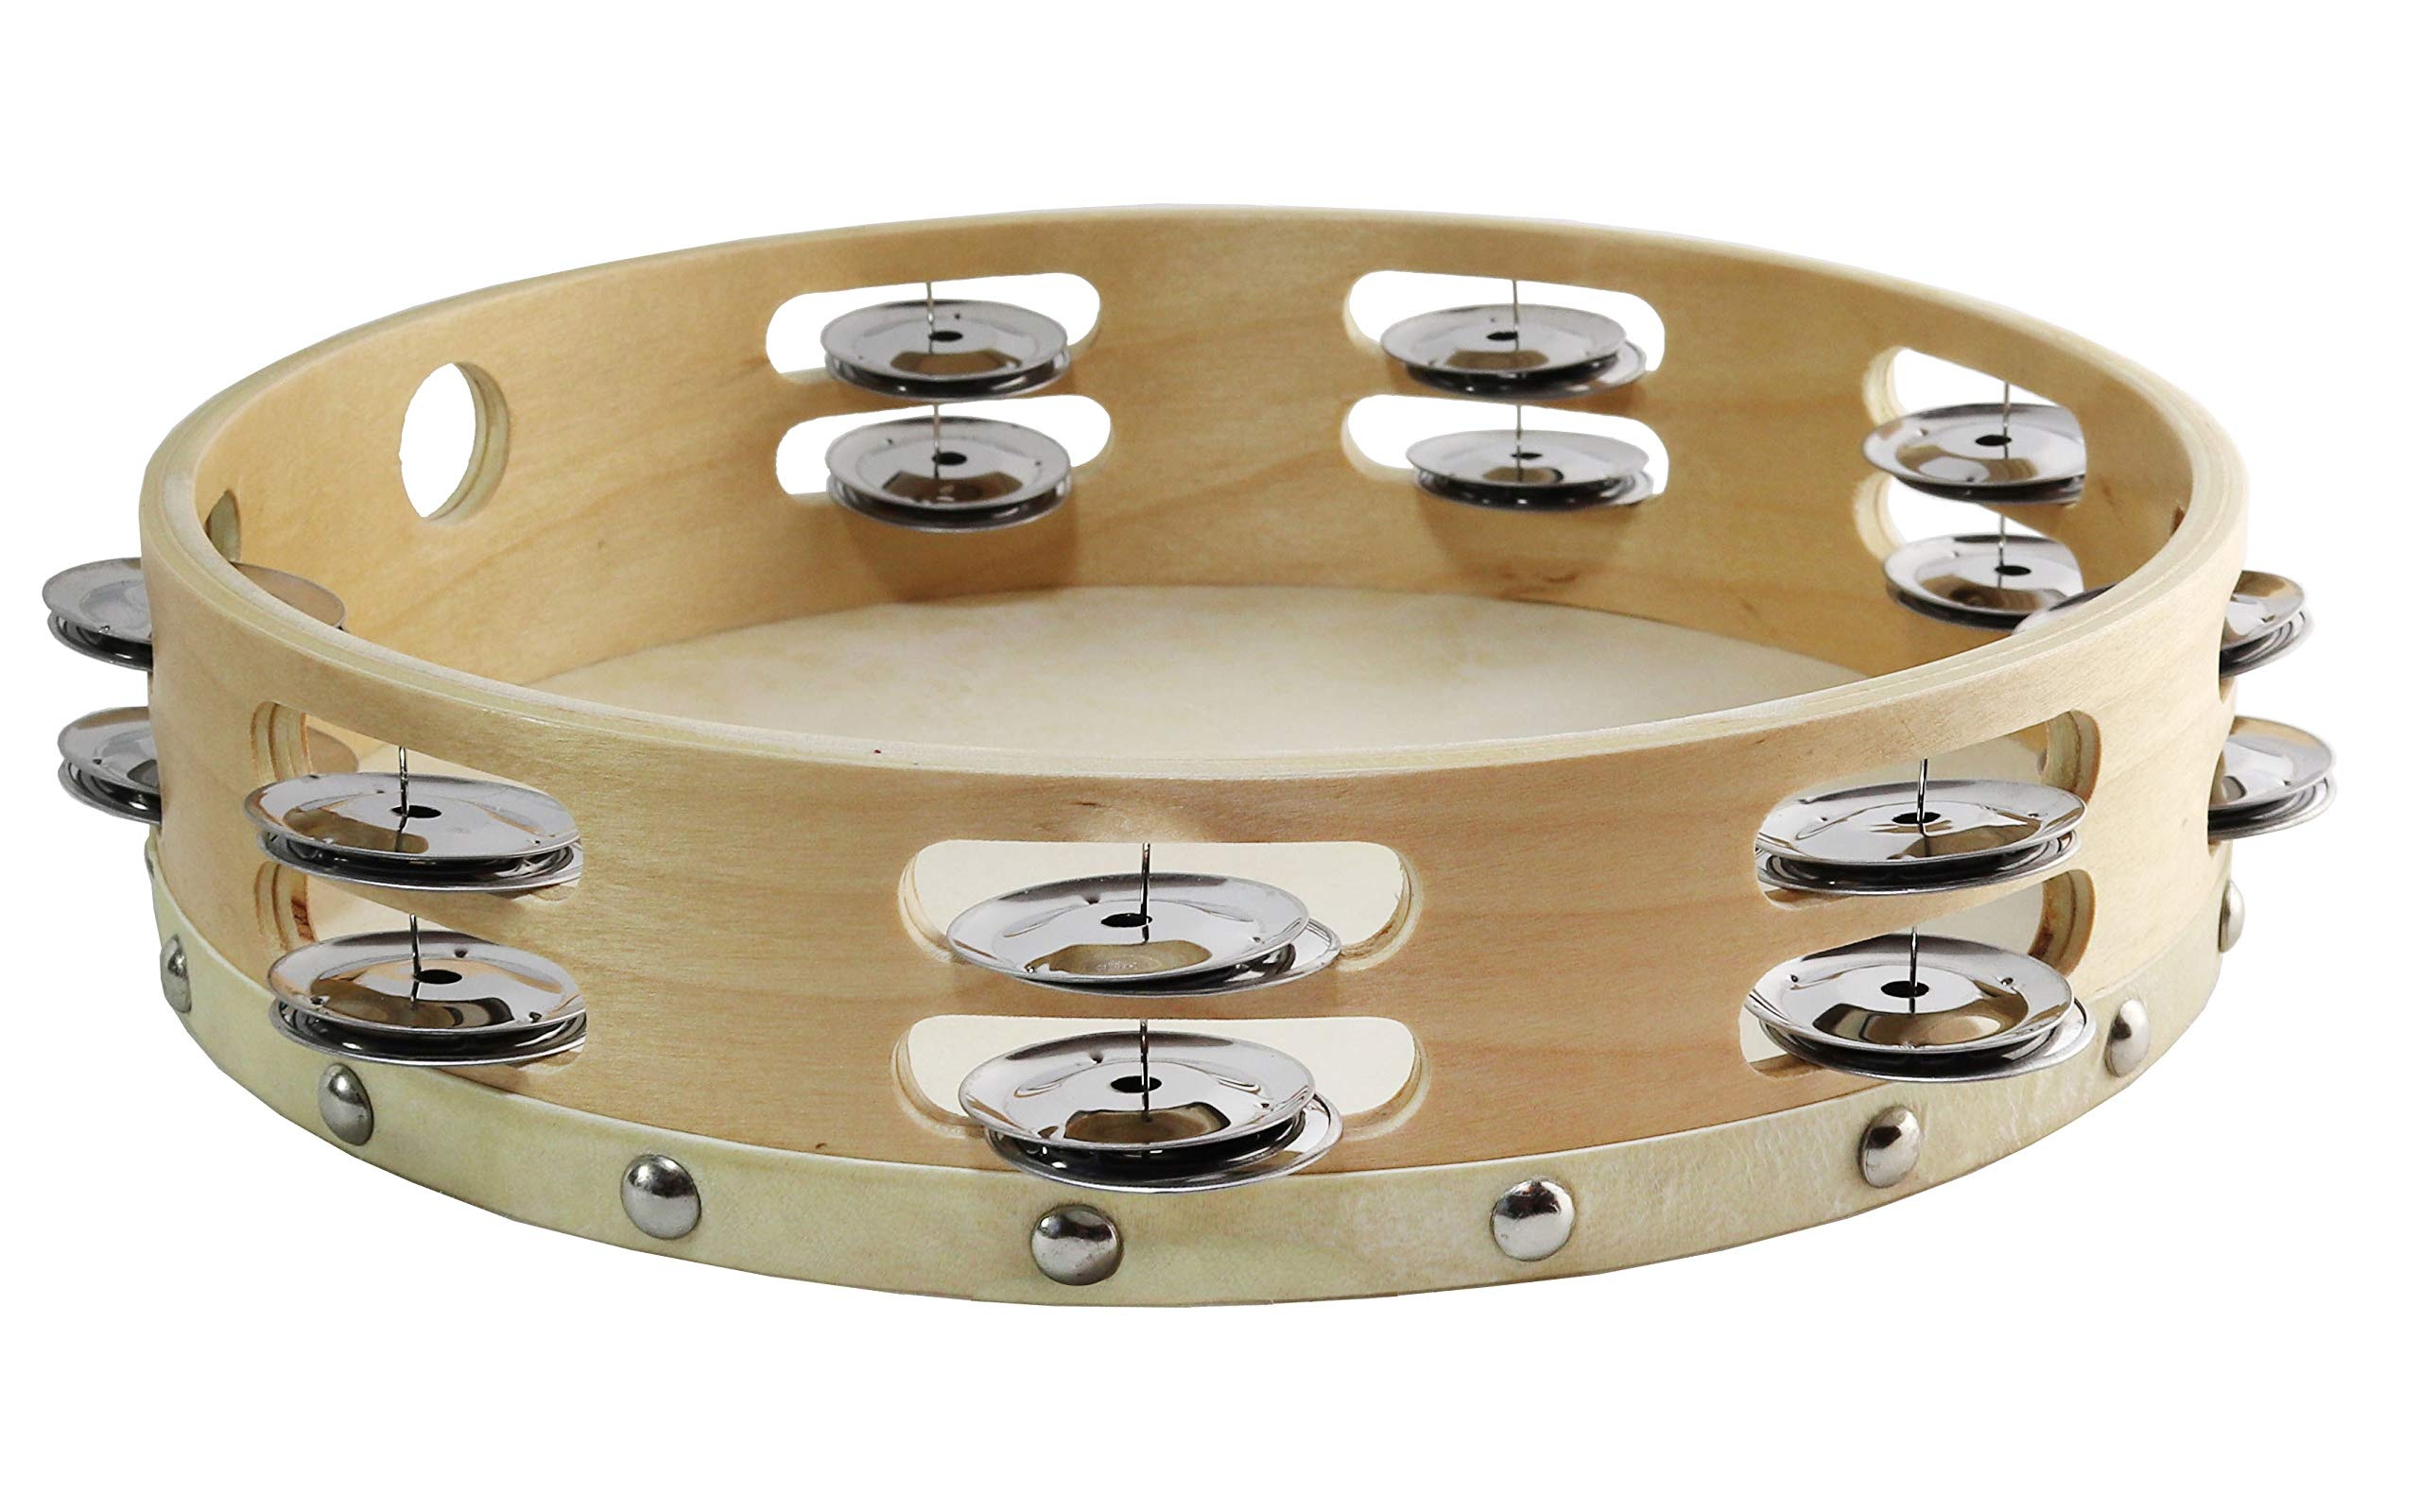 Tambourine: Pairs Of Small Metal Jingles, "Zills", Plywood Circle Frame With Leather Drumhead. 2560x1600 HD Wallpaper.